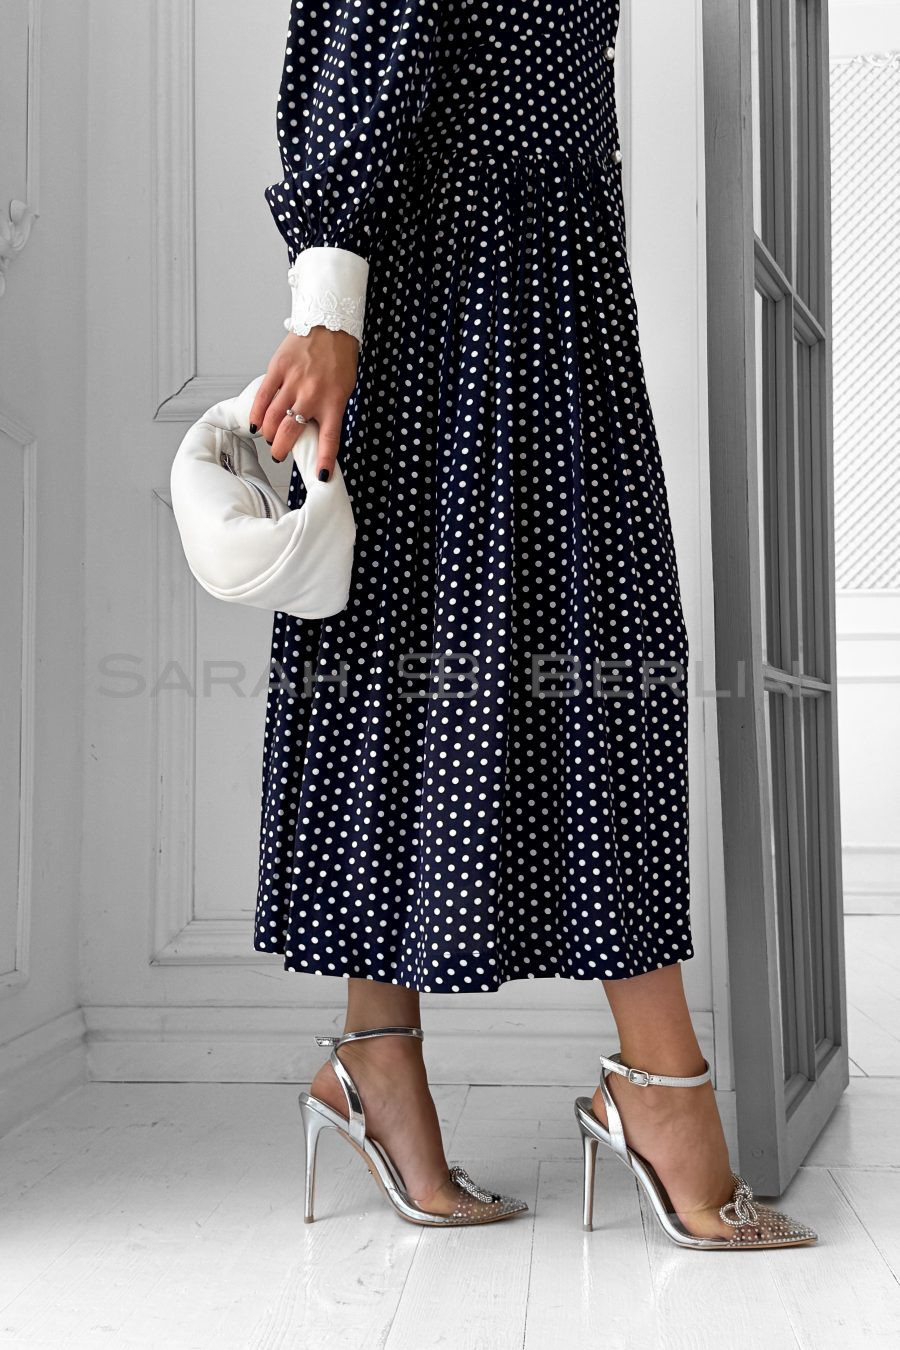 Polka dot viscose dress with white collar and cuffs